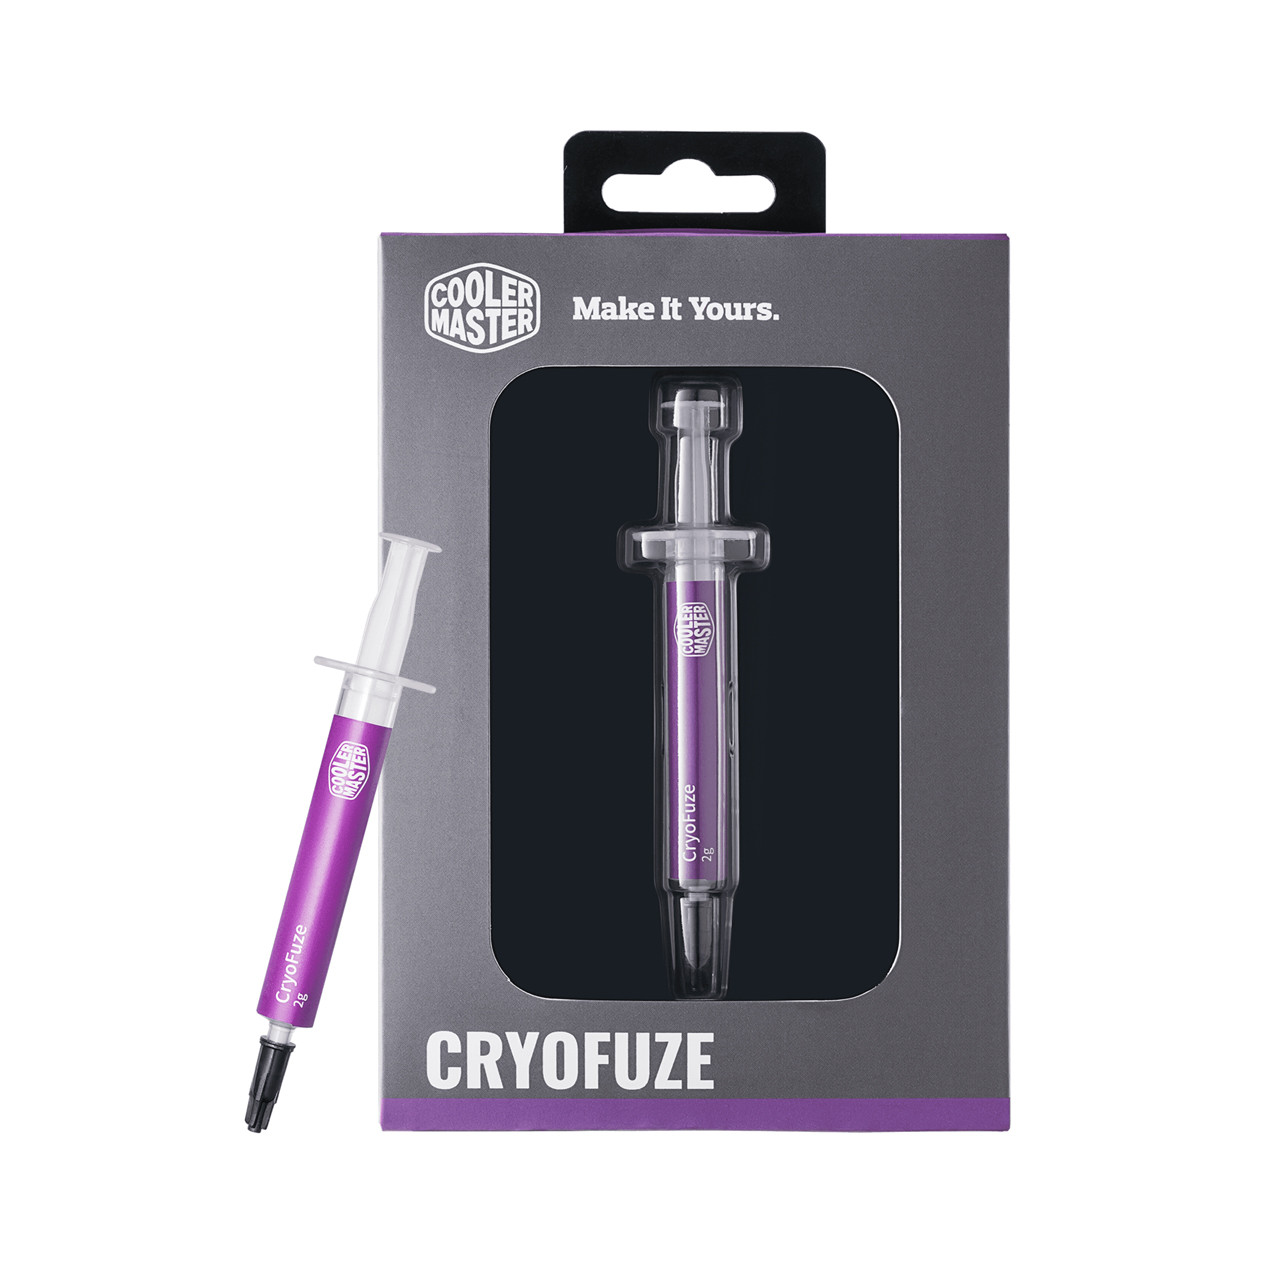 Cooler Master CryoFuze Ultra-High Performance Thermal Paste,Temp -50°C up to 250°C for CPU, GPU Coolers MGZ-NDSG-N07M-R2